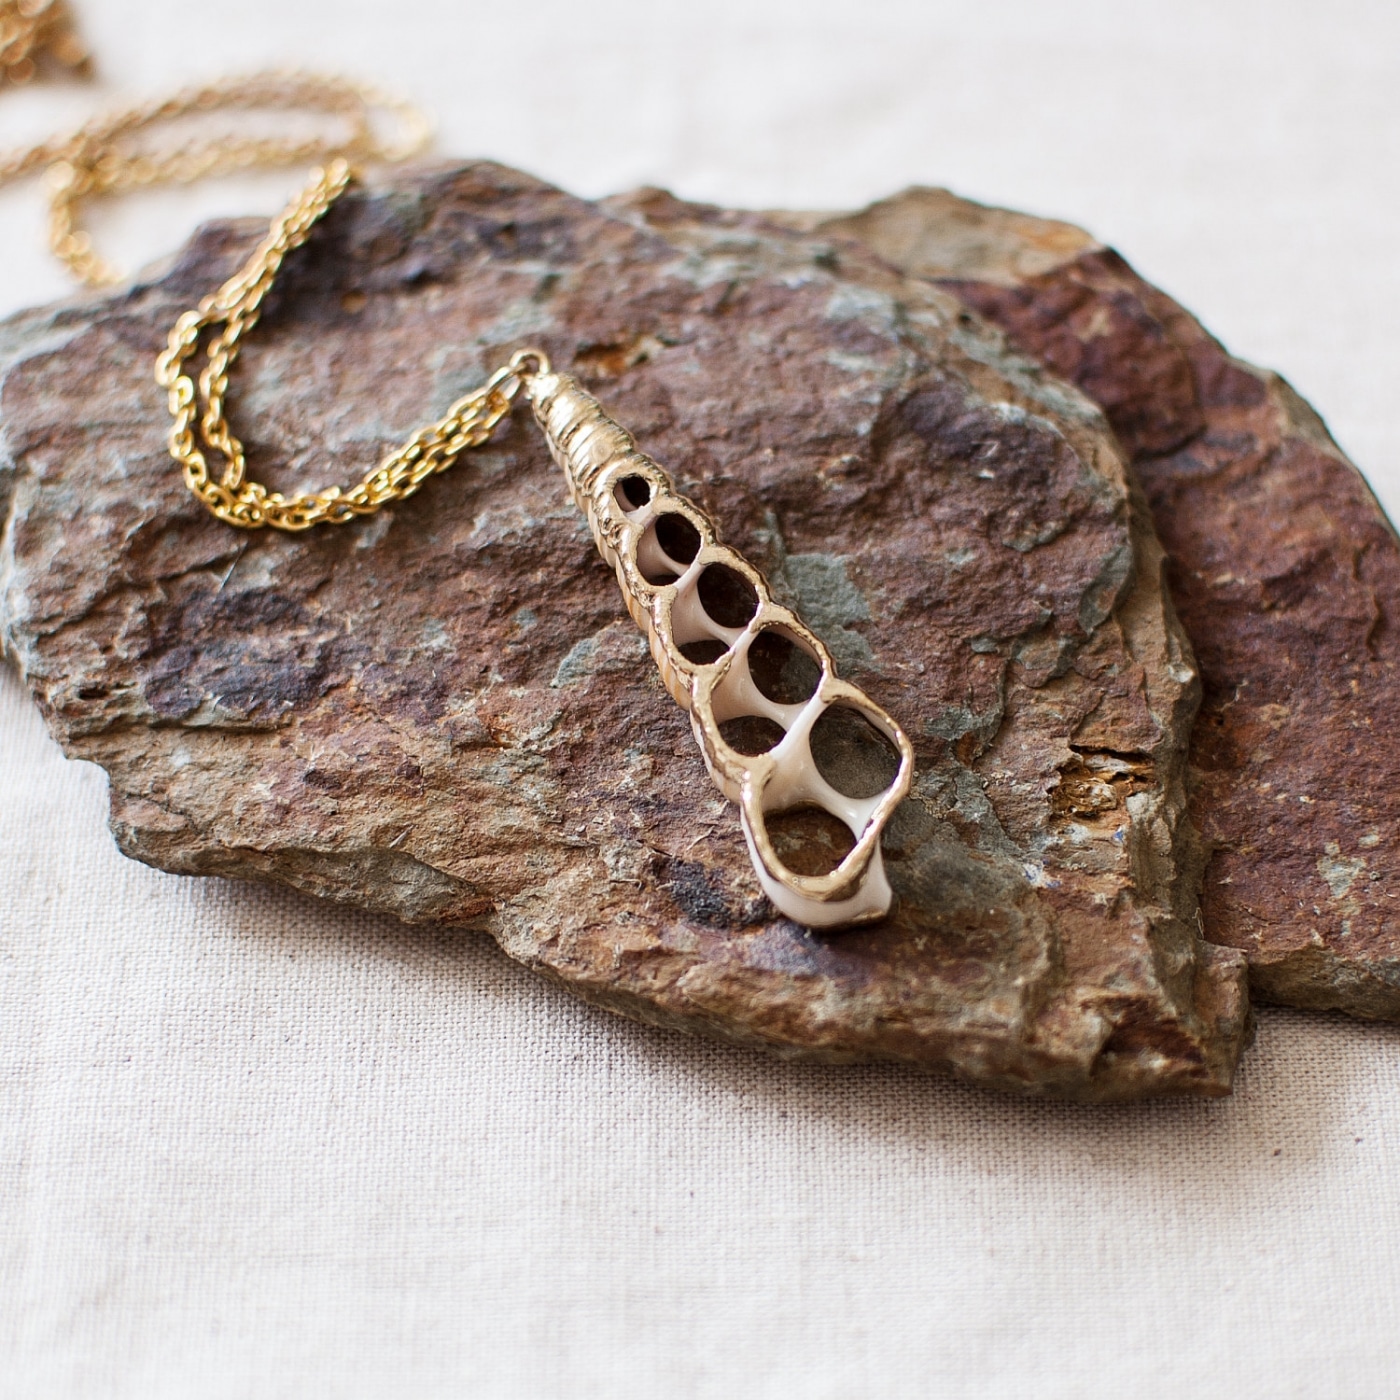 Nature Themed Jewelry That Captures The Wonder Of Planet Earth